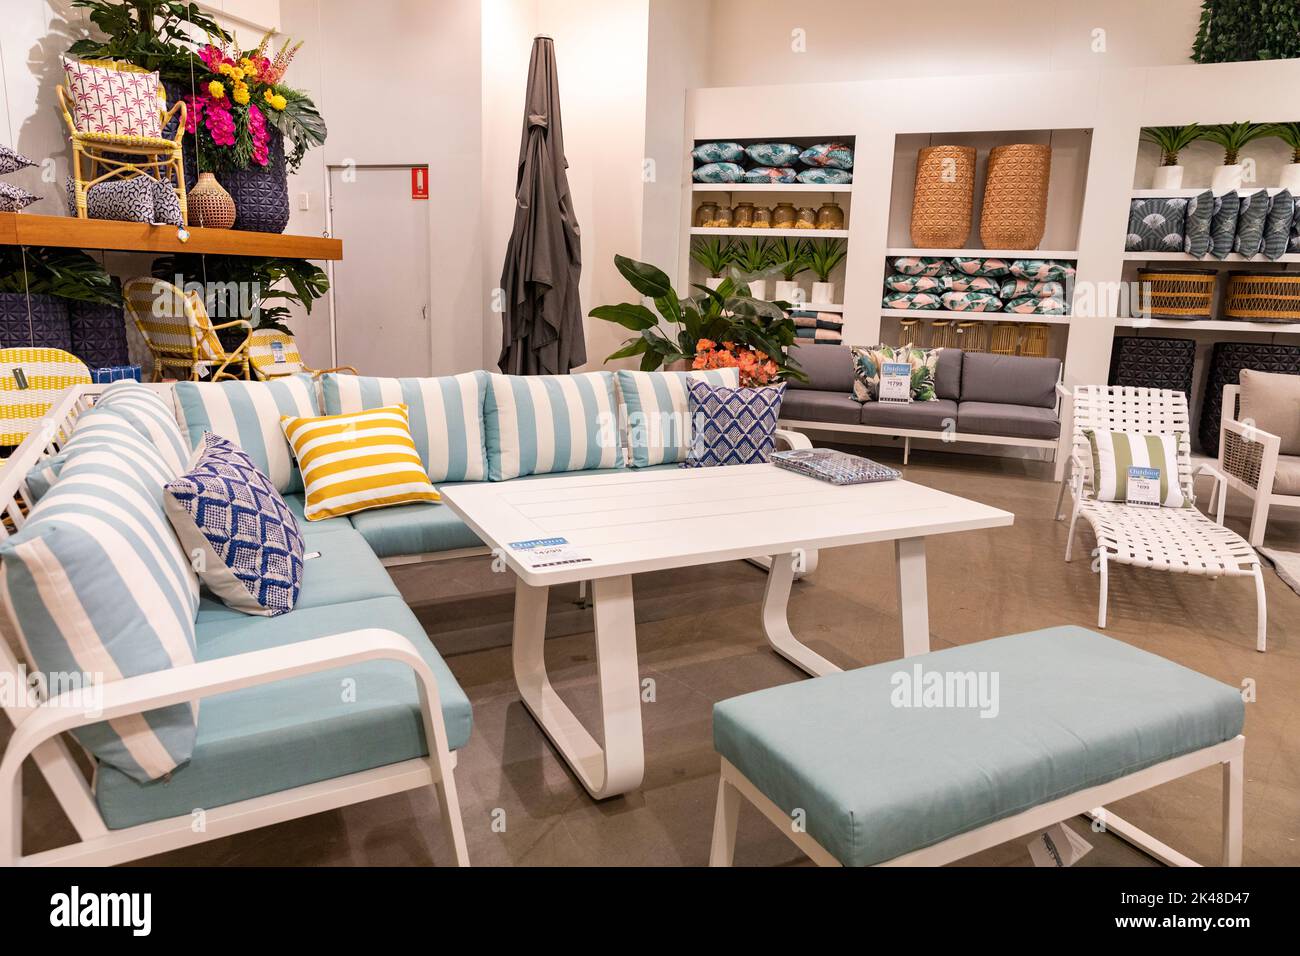 Outdoor furniture table and chairs in Domayne Harvey Norman furniture store in Belrose,Sydney,NSW,Australia,2022 Stock Photo